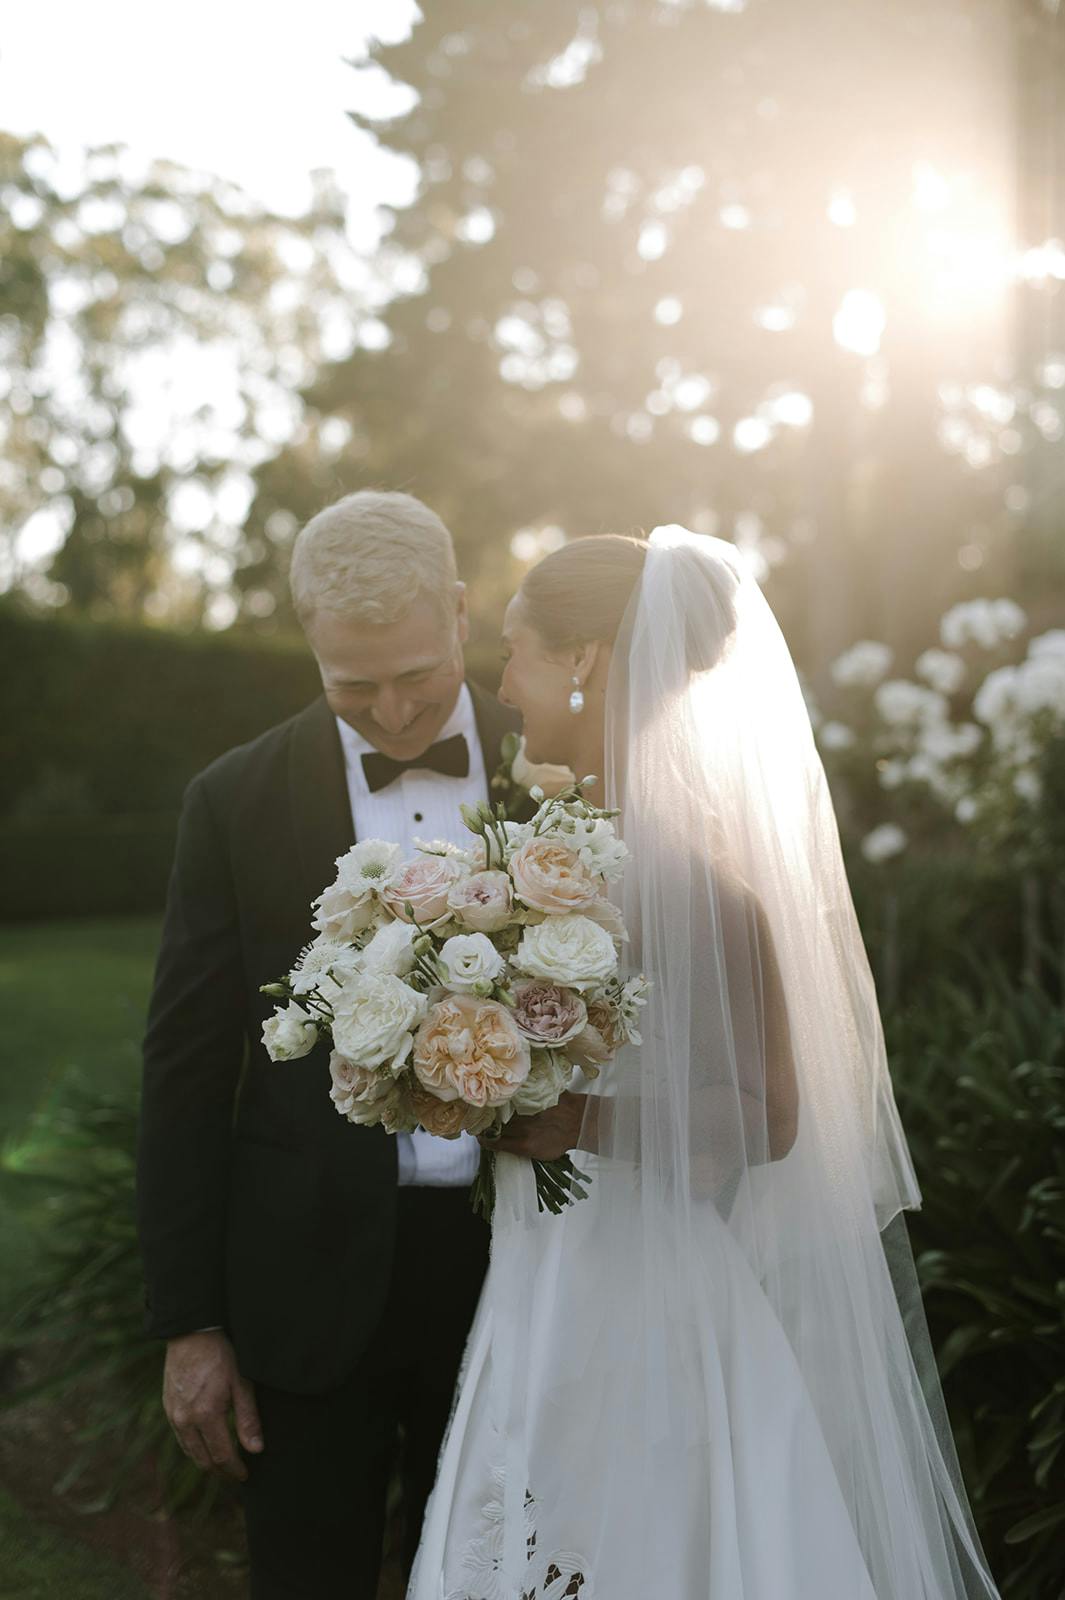 A bride and groom share a tender moment outdoors during their wedding. The bride holds a bouquet of white and peach flowers and wears a veil, while the groom looks down, smiling. Sunlight filters through the trees, creating a warm, golden glow around them.